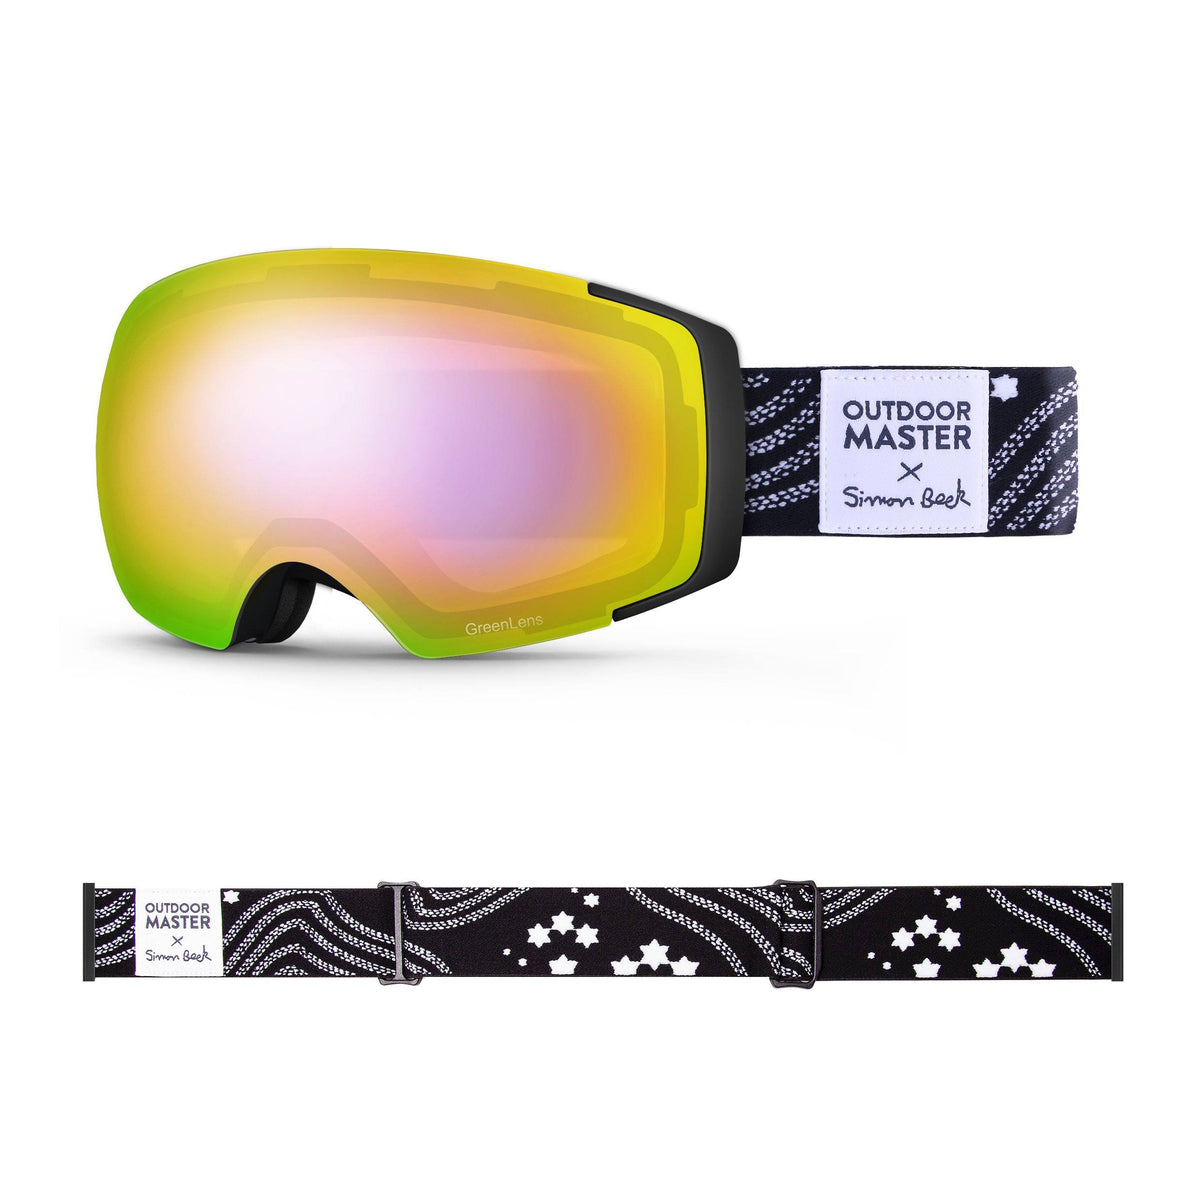 OutdoorMaster x Simon Beck Ski Goggles Pro Series - Snowshoeing Art Limited Edition OutdoorMaster GreenLens VLT 45% TAC Purple with REVO Red Polarized Star Road-Black